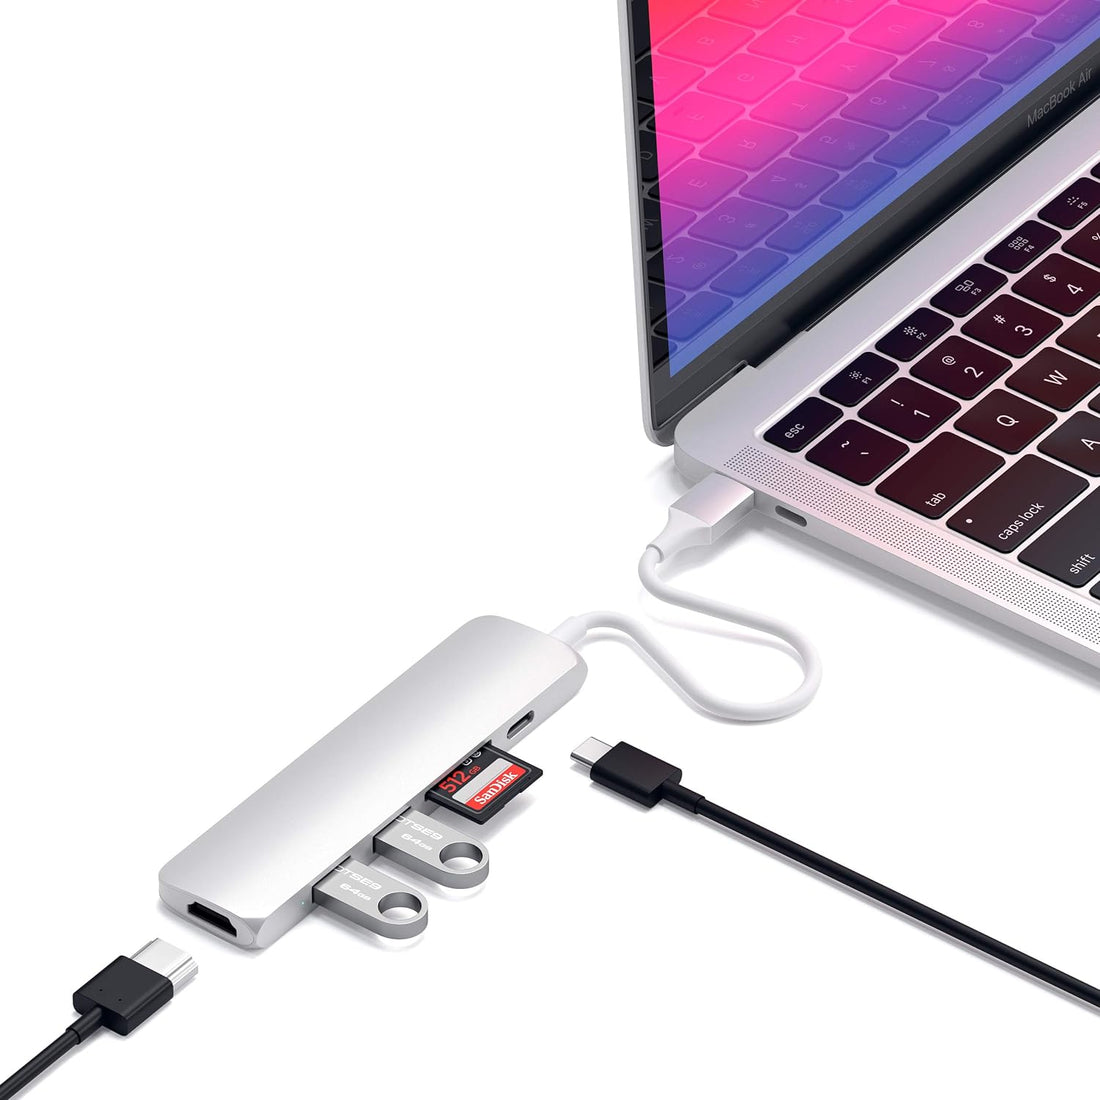 Satechi Slim Aluminum Type-C Multi-Port Adapter V2 with USB-C PD, 4K HDMI (30Hz), Micro/SD Card Readers, USB 3.0 - Compatible with 2018 MacBook Pro/Air, 2018 iPad Pro, Microsoft Surface Go (Silver)